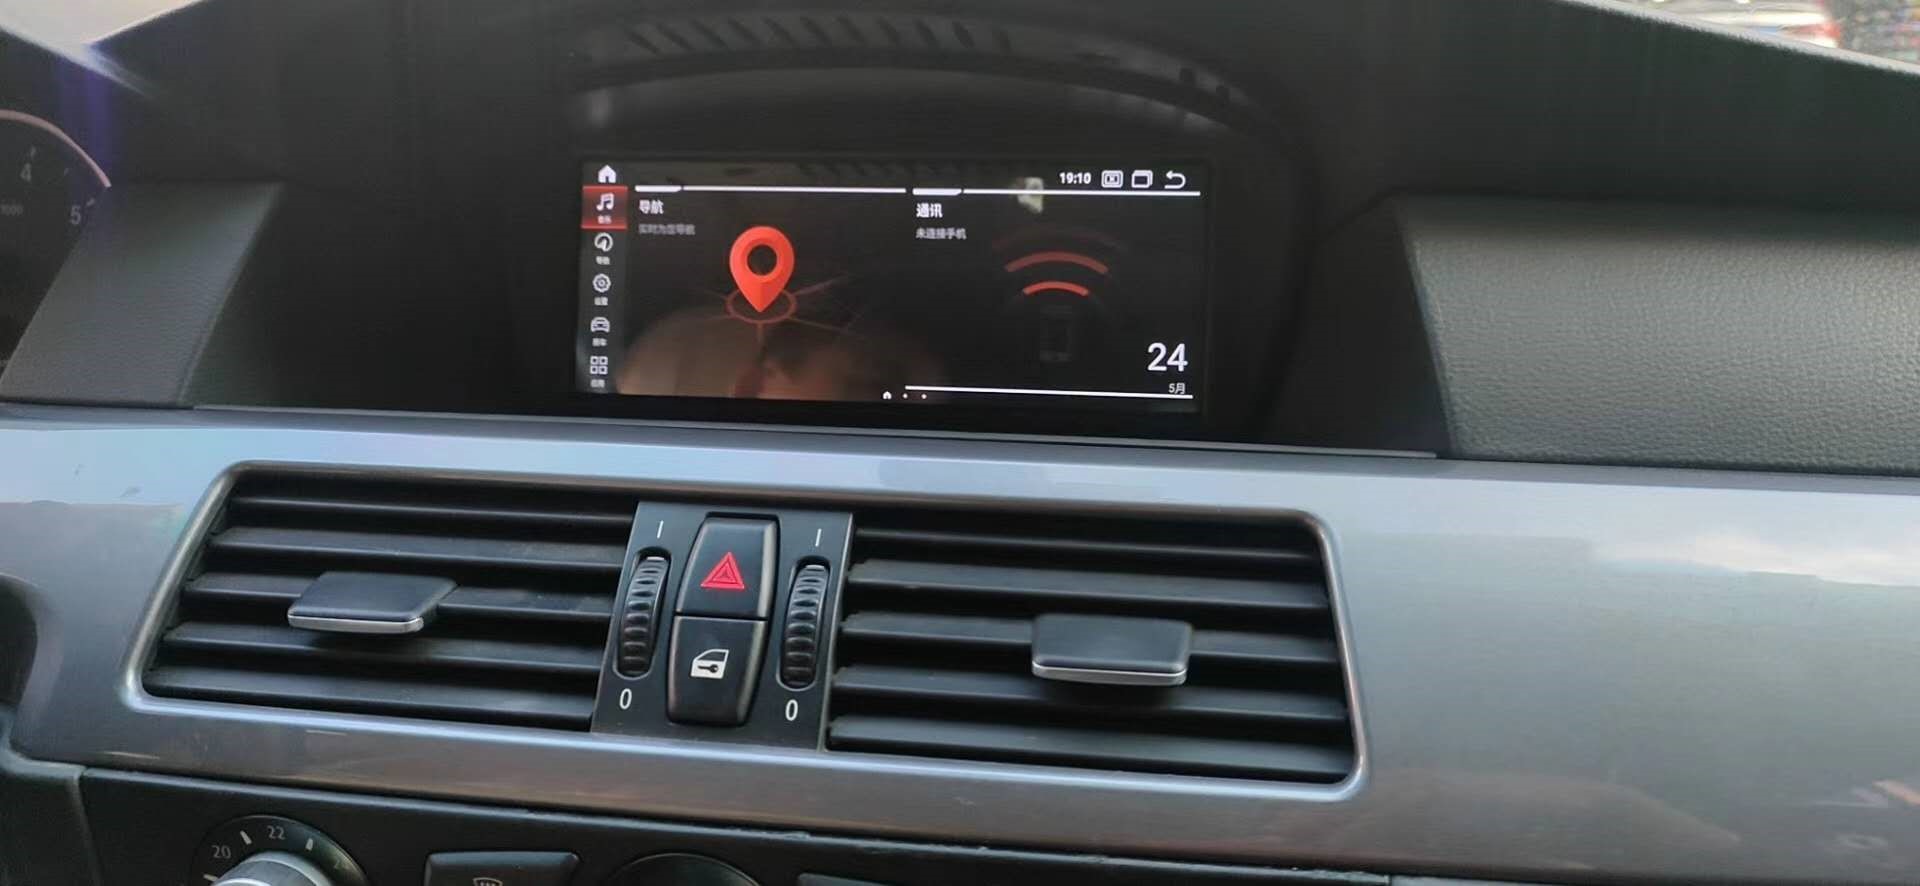 With these functions, your car can be considered intelligent